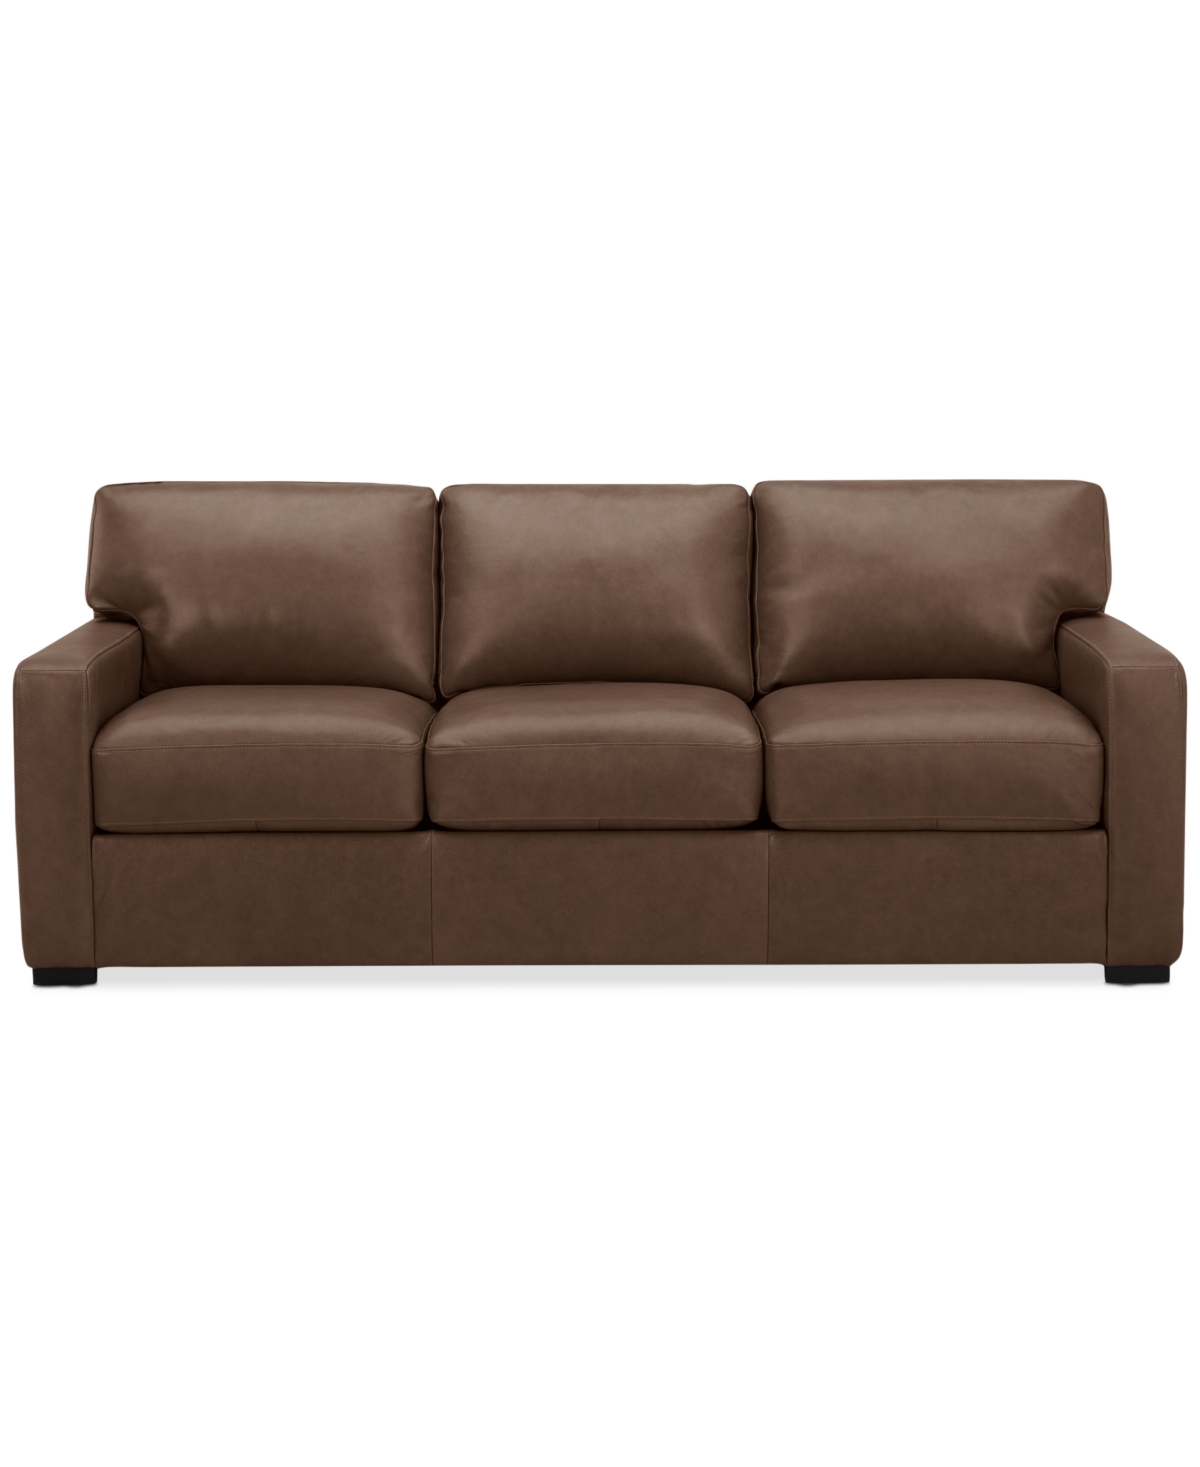 Macy's Radley 86" Leather Sofa, Created For  In Chesnut